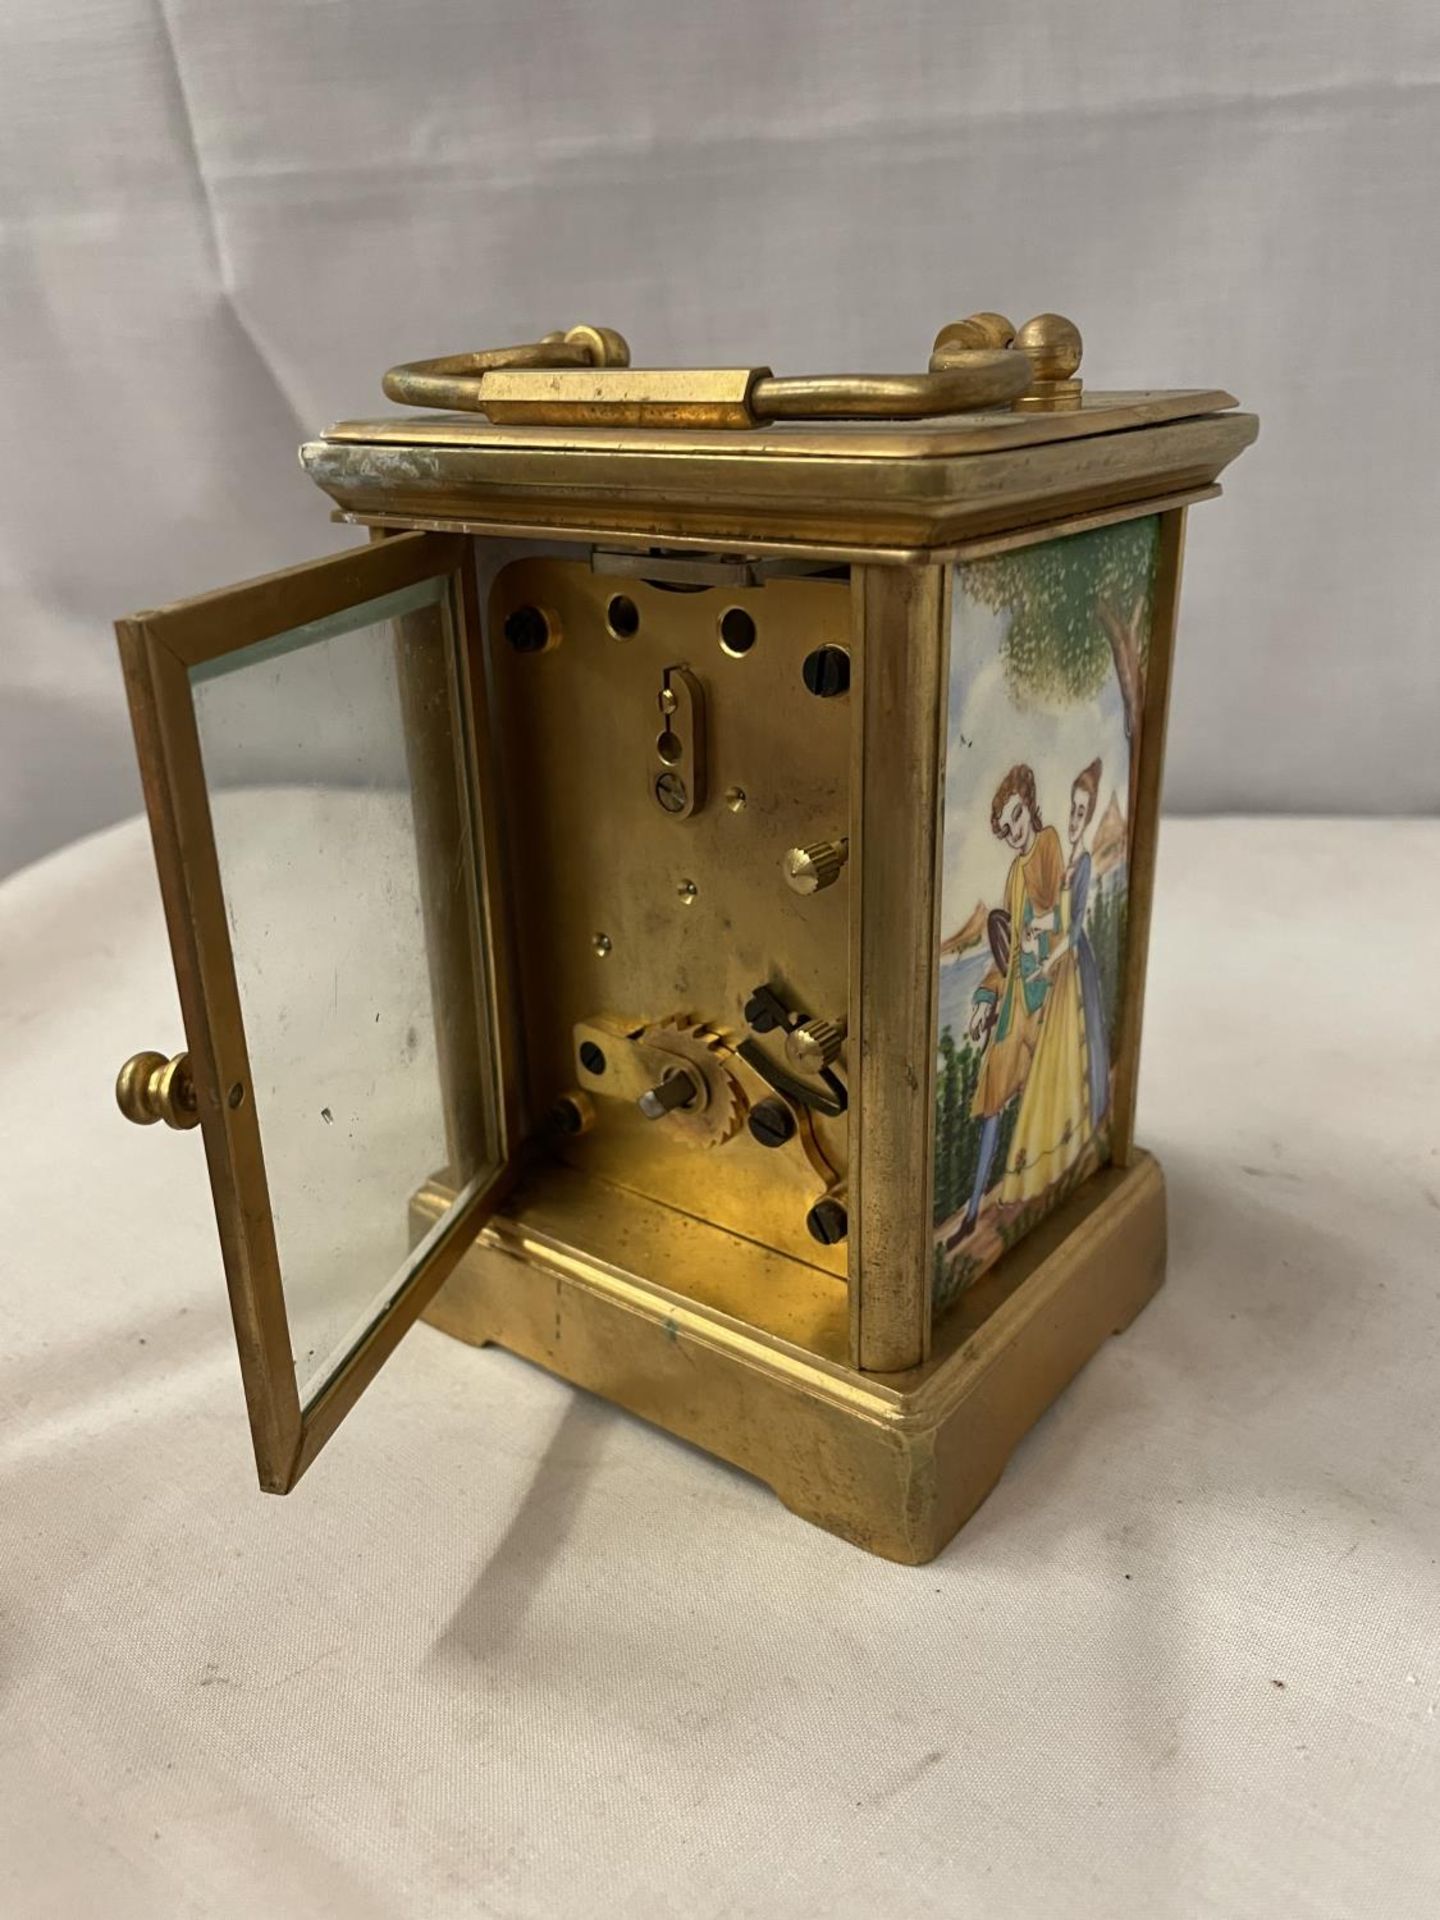 A VINTAGE CARRIAGE CLOCK WITH DECORATIVE SIDE PANELS DEPICTING LADY AND GENTLEMAN - Image 4 of 5